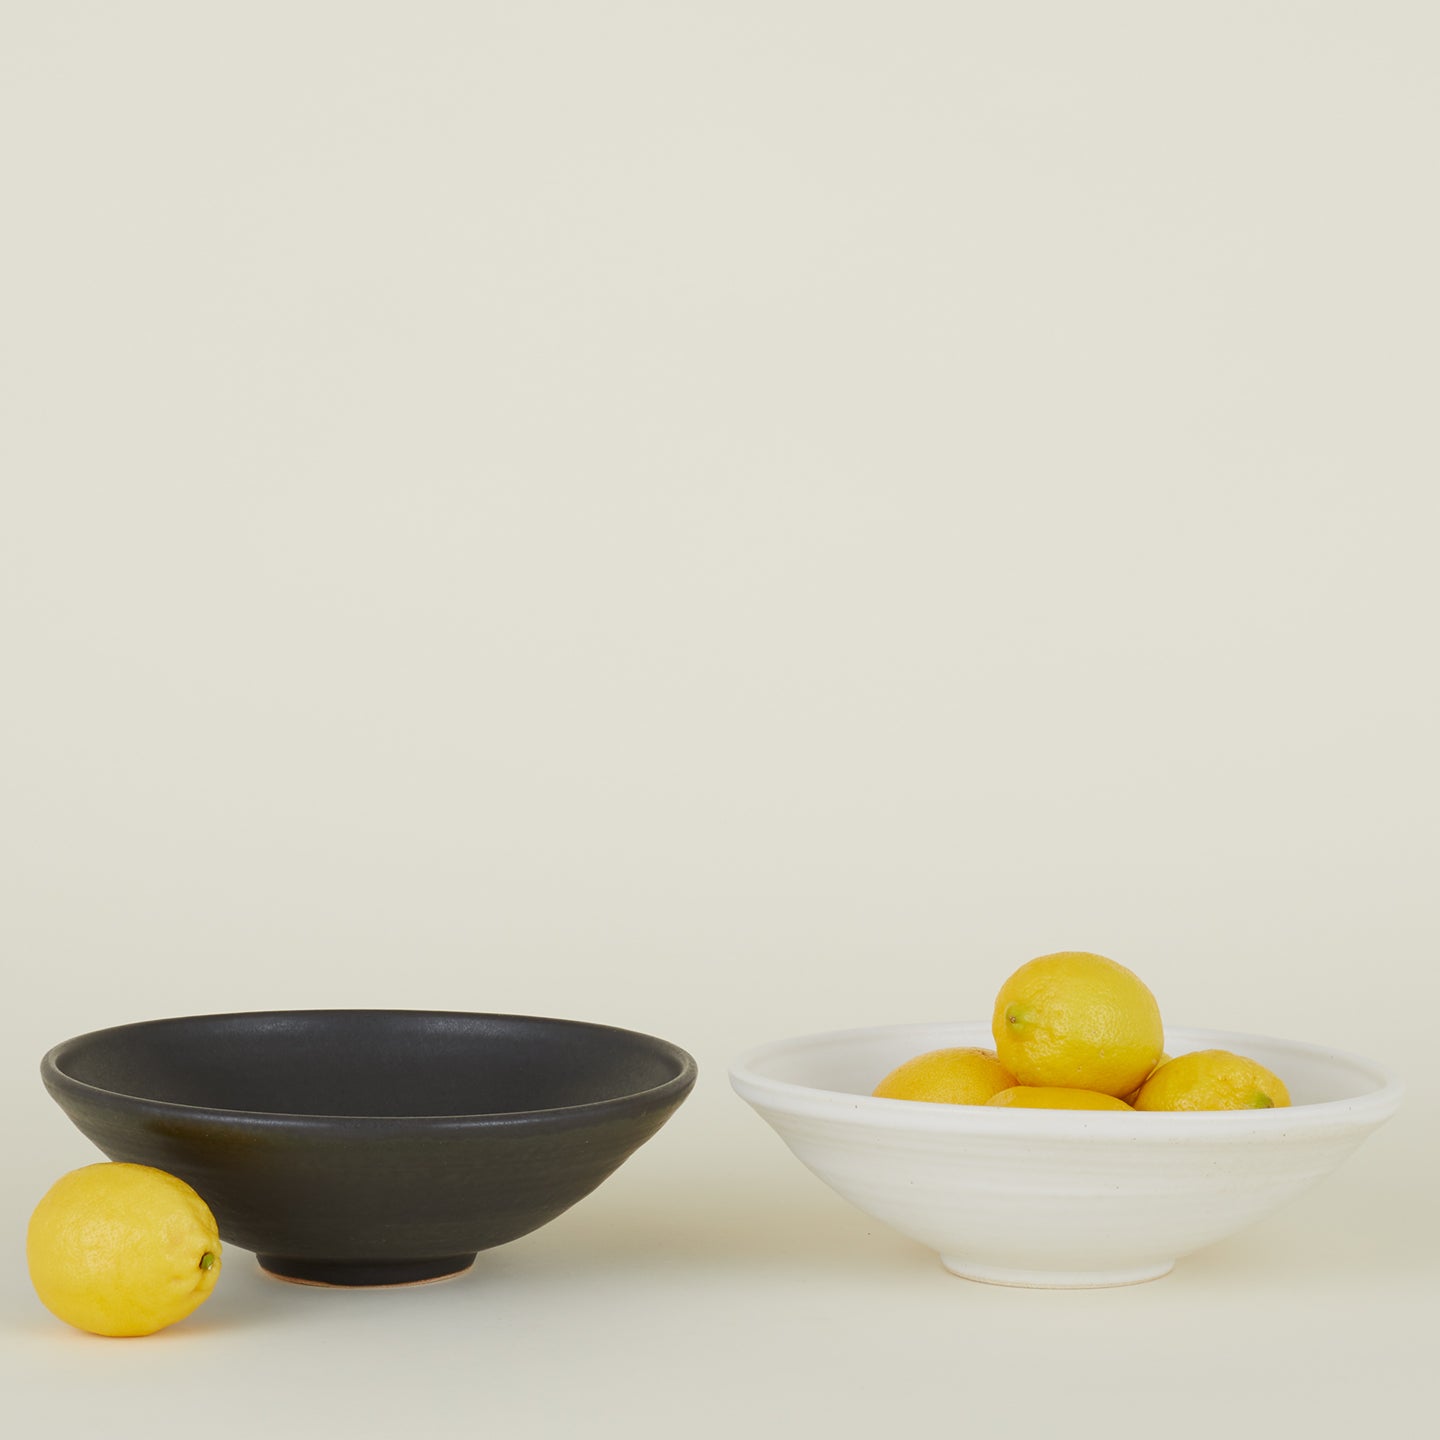 Two Stoneware Flared Bowls, one in Black and one in Eggshell, filled with lemons.